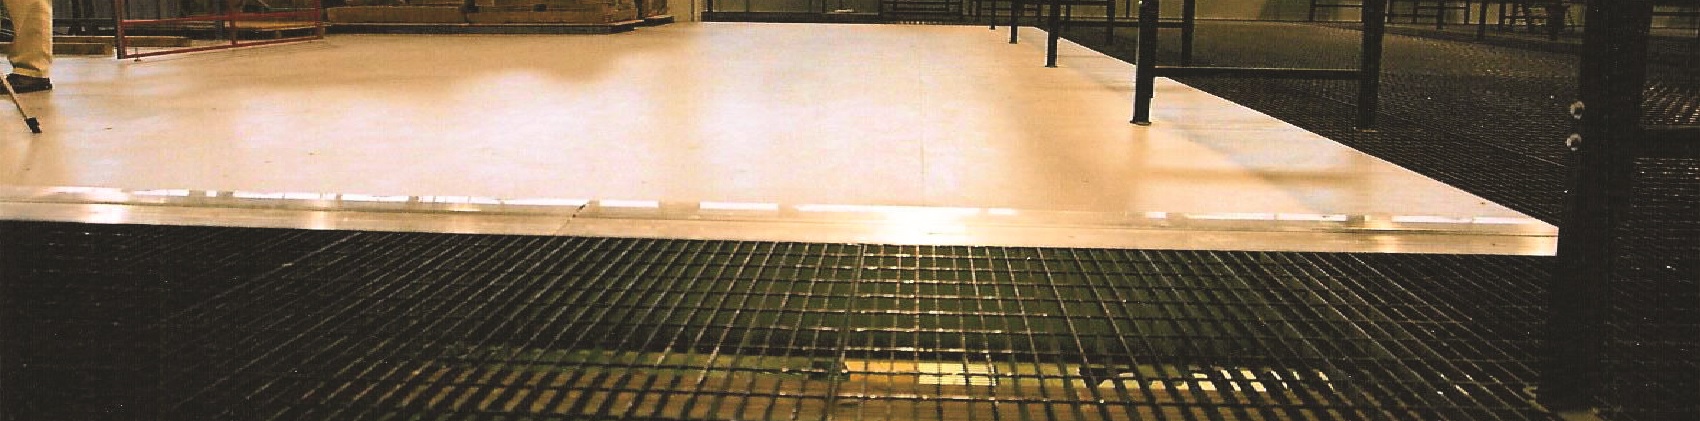 Tennessee Distribution Facility with a bar grated deck surface